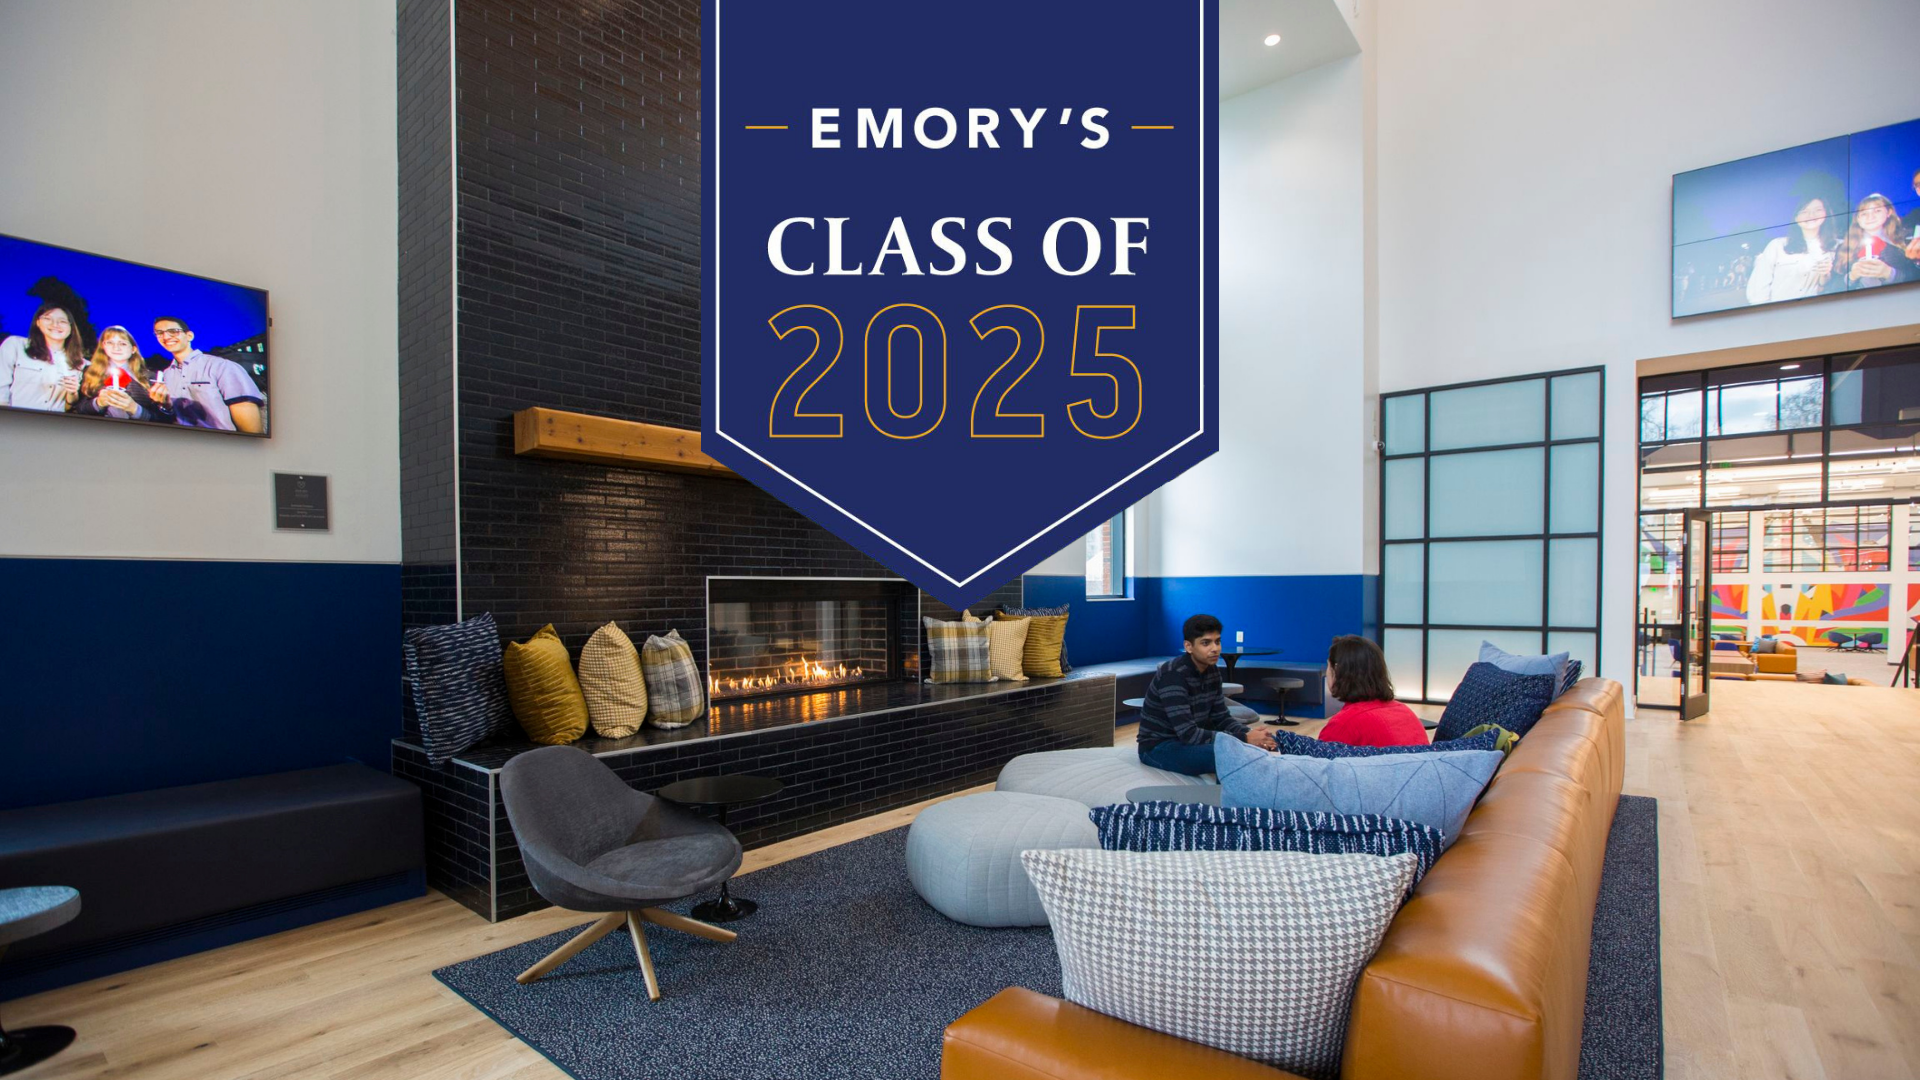 The final students admitted to Emory's Class of 2025 are drawn from the largest and most diverse applicant pool in the university's history.